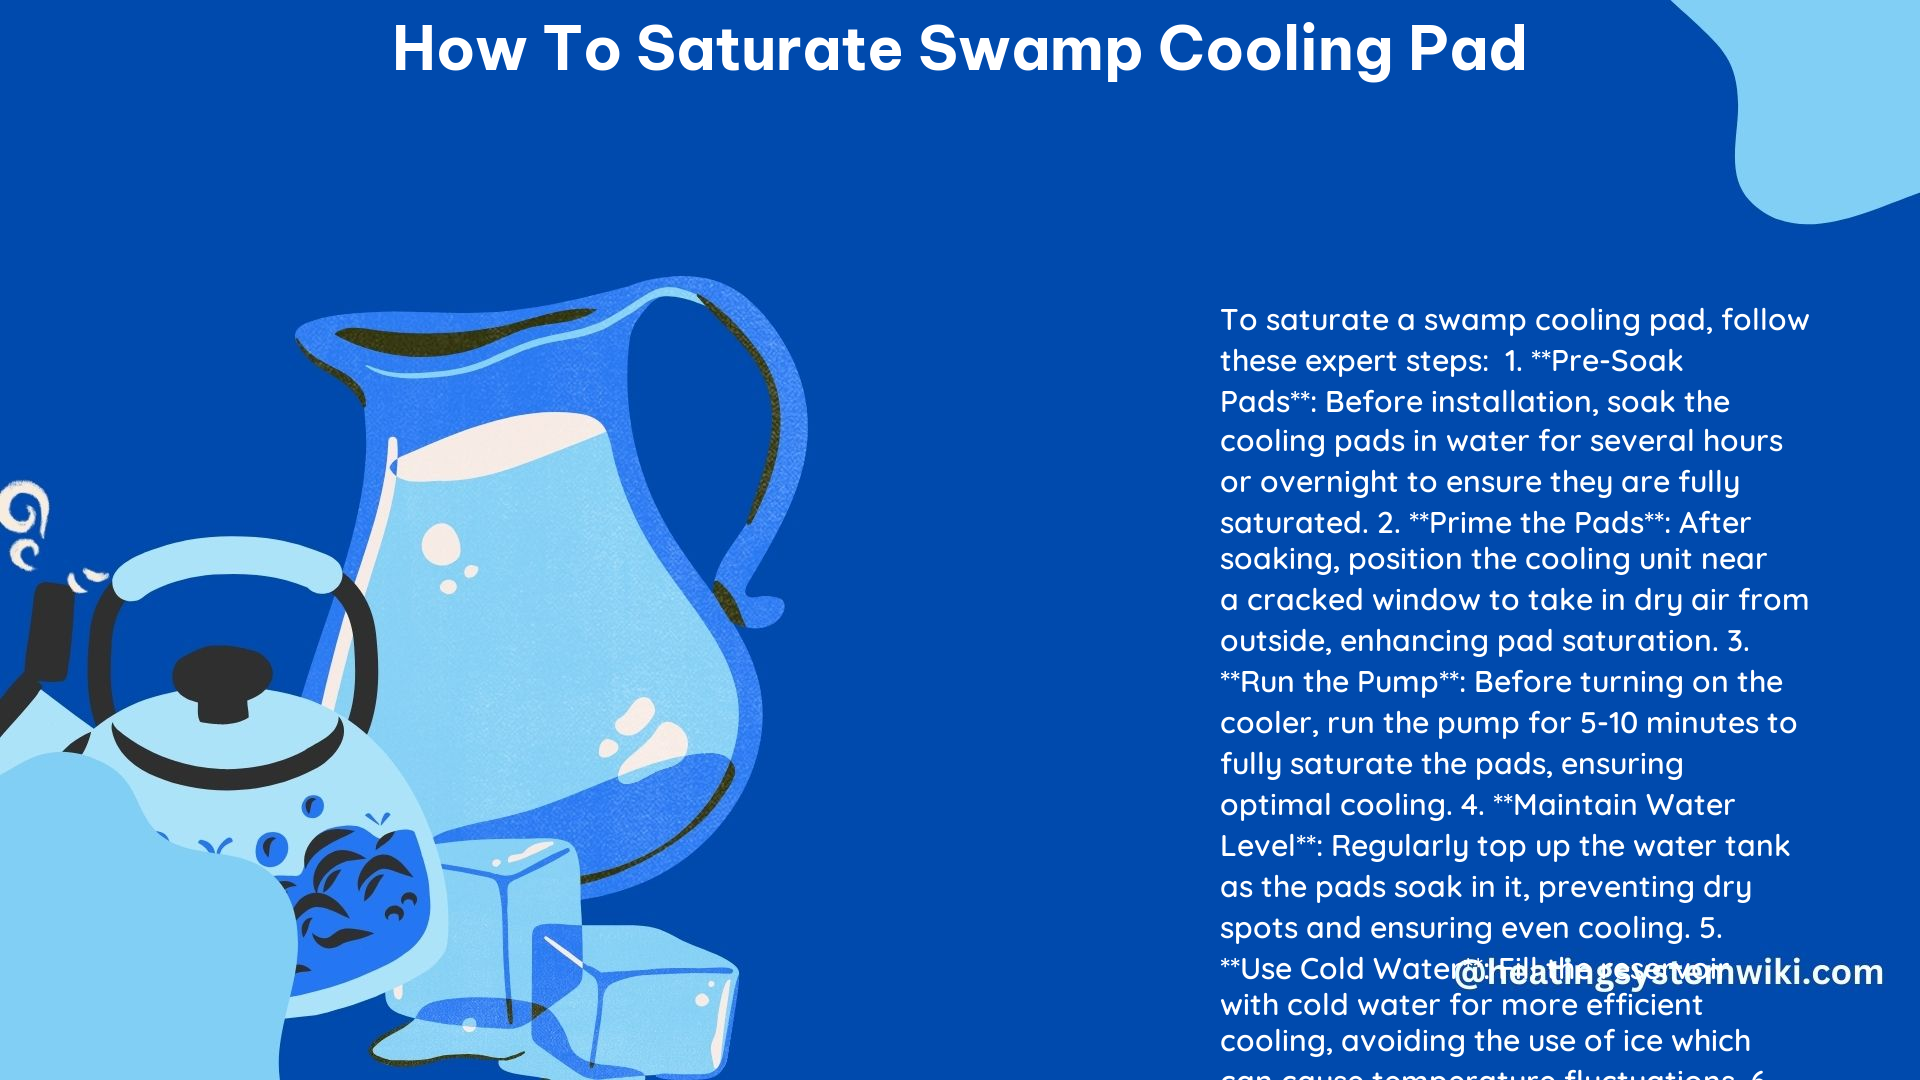 How to Saturate Swamp Cooling Pad